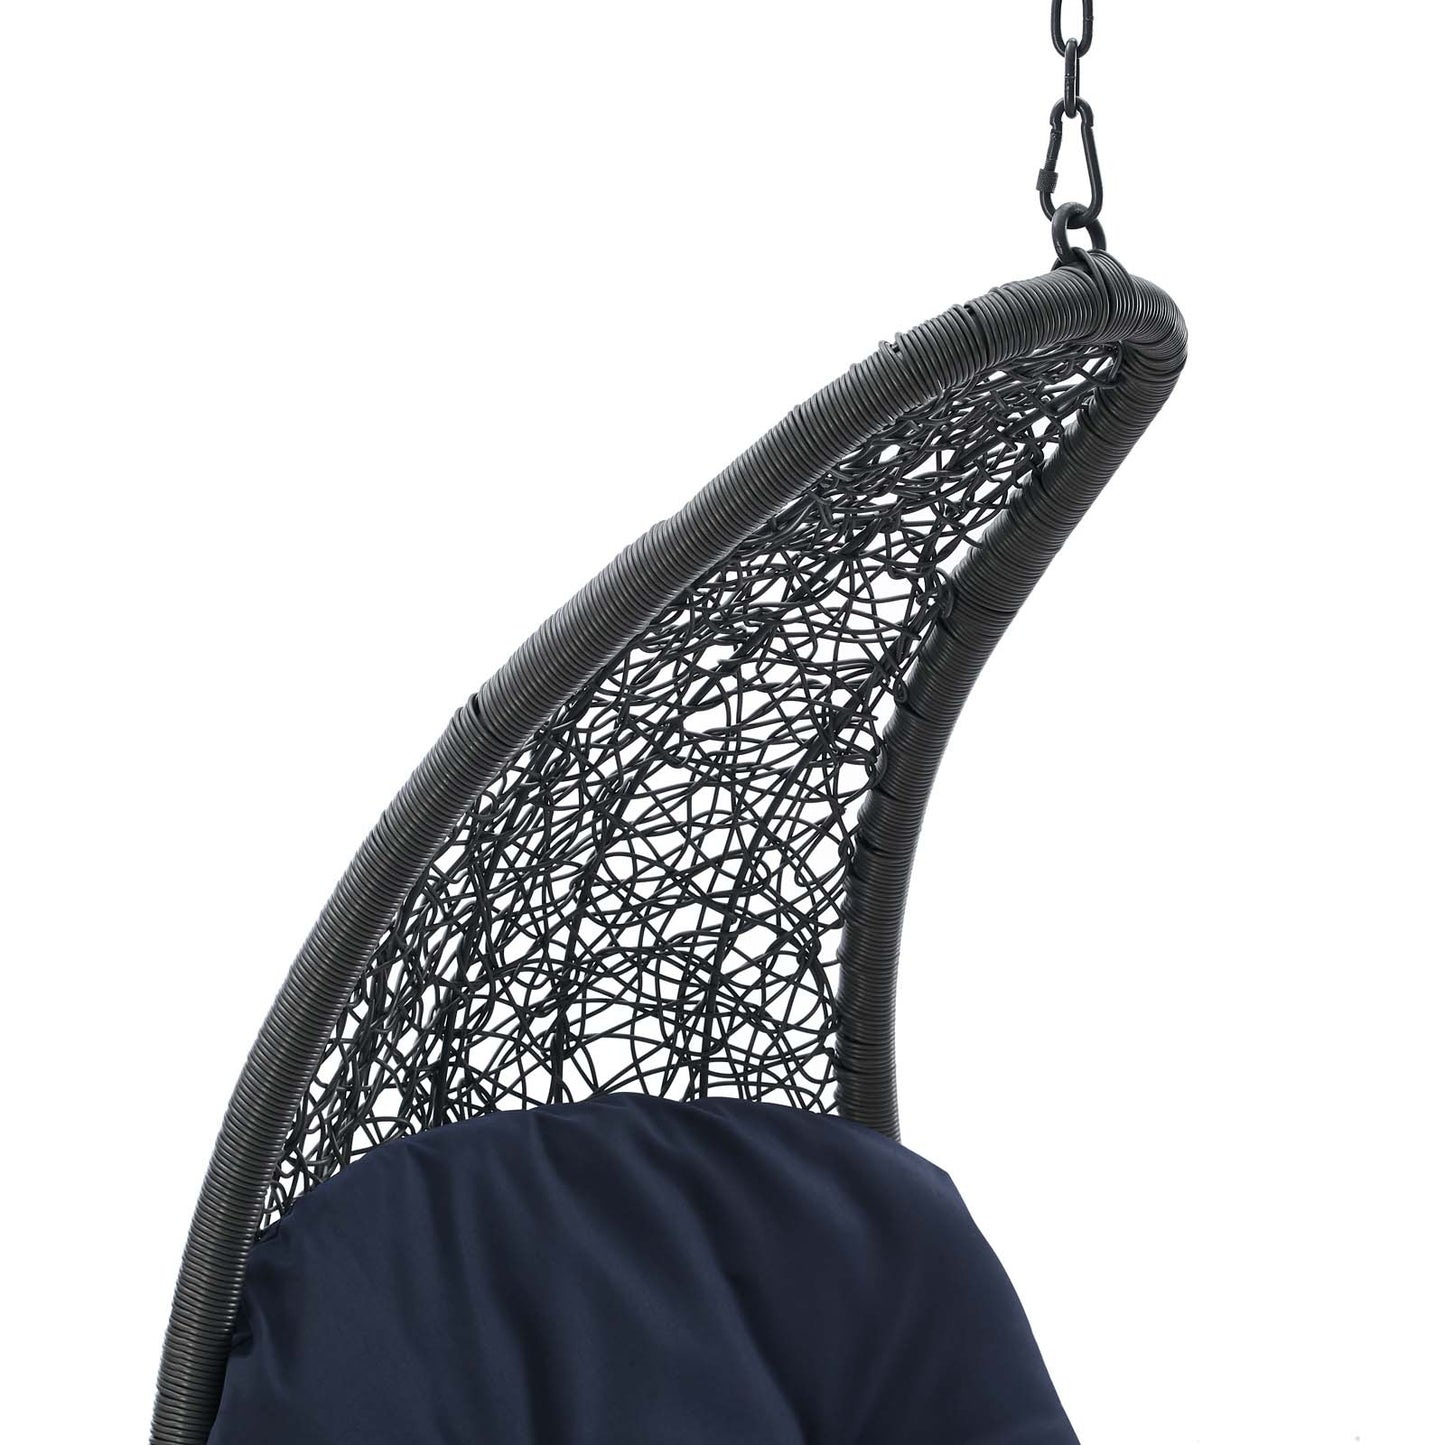 Landscape Hanging Chaise Lounge Outdoor Patio Swing Chair Light Gray Navy EEI-4589-LGR-NAV